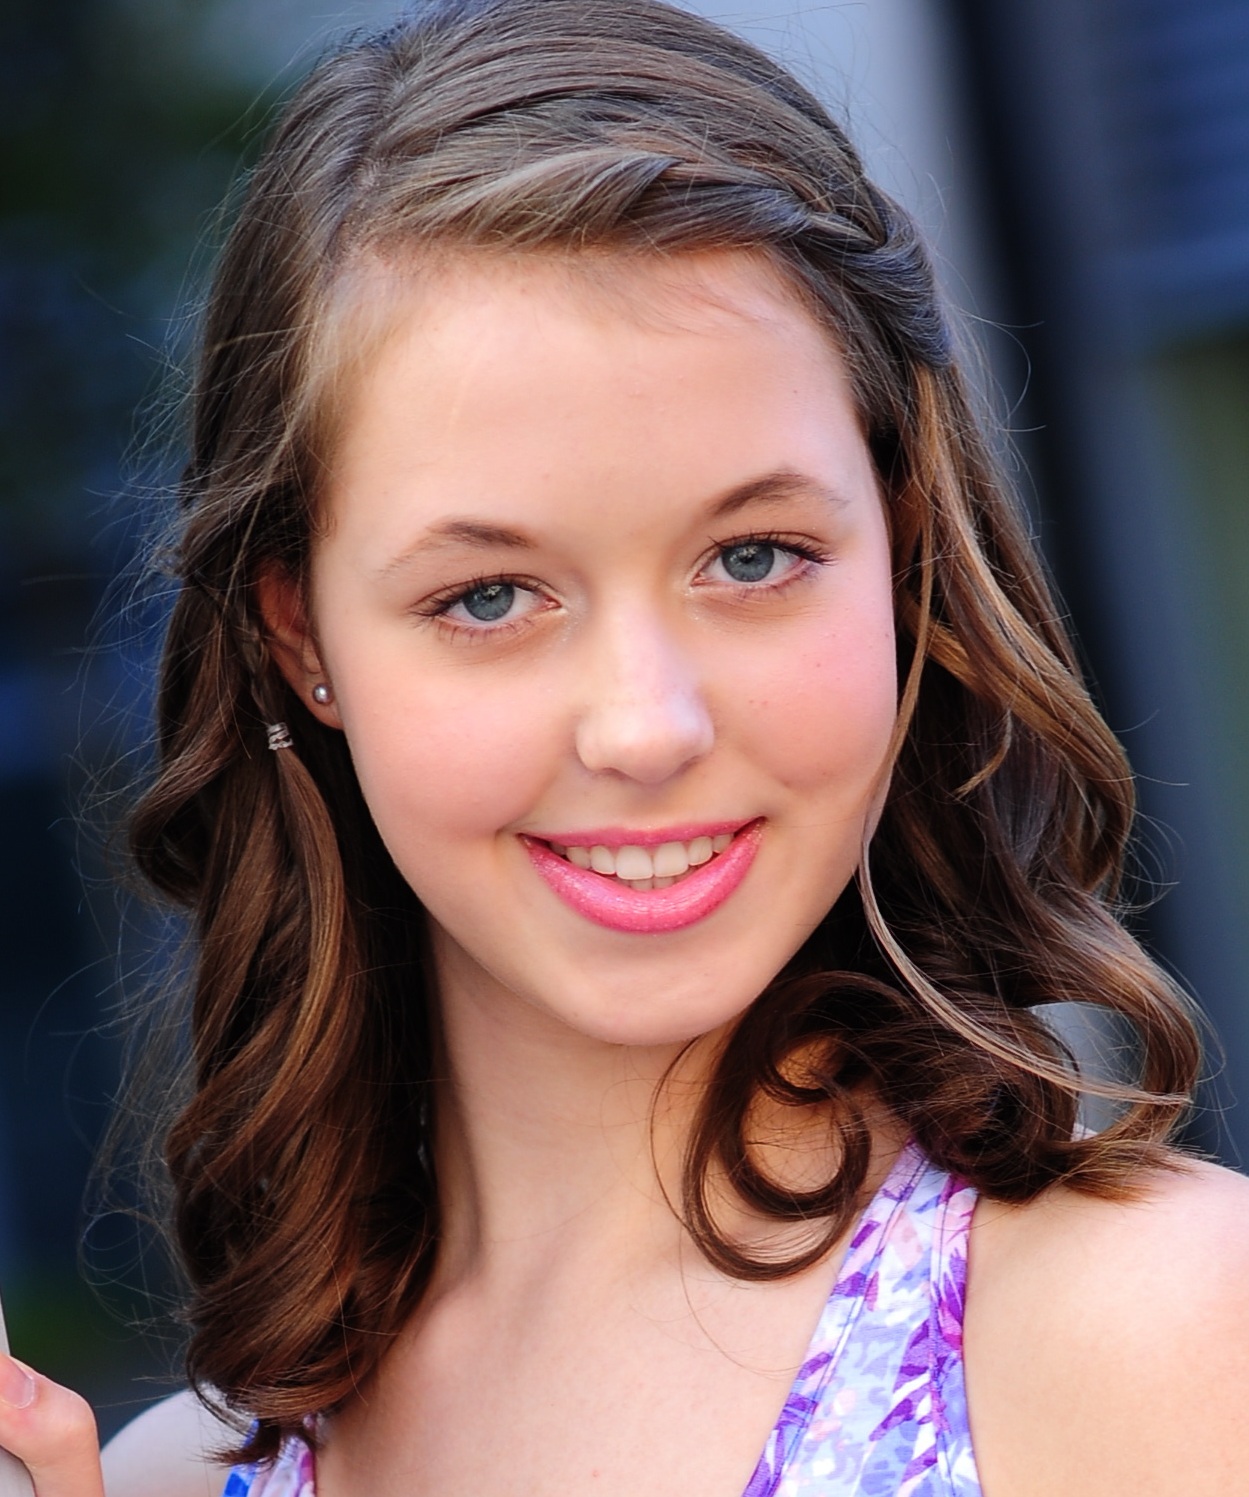 Hailey Grace- Teen Model and Actress.